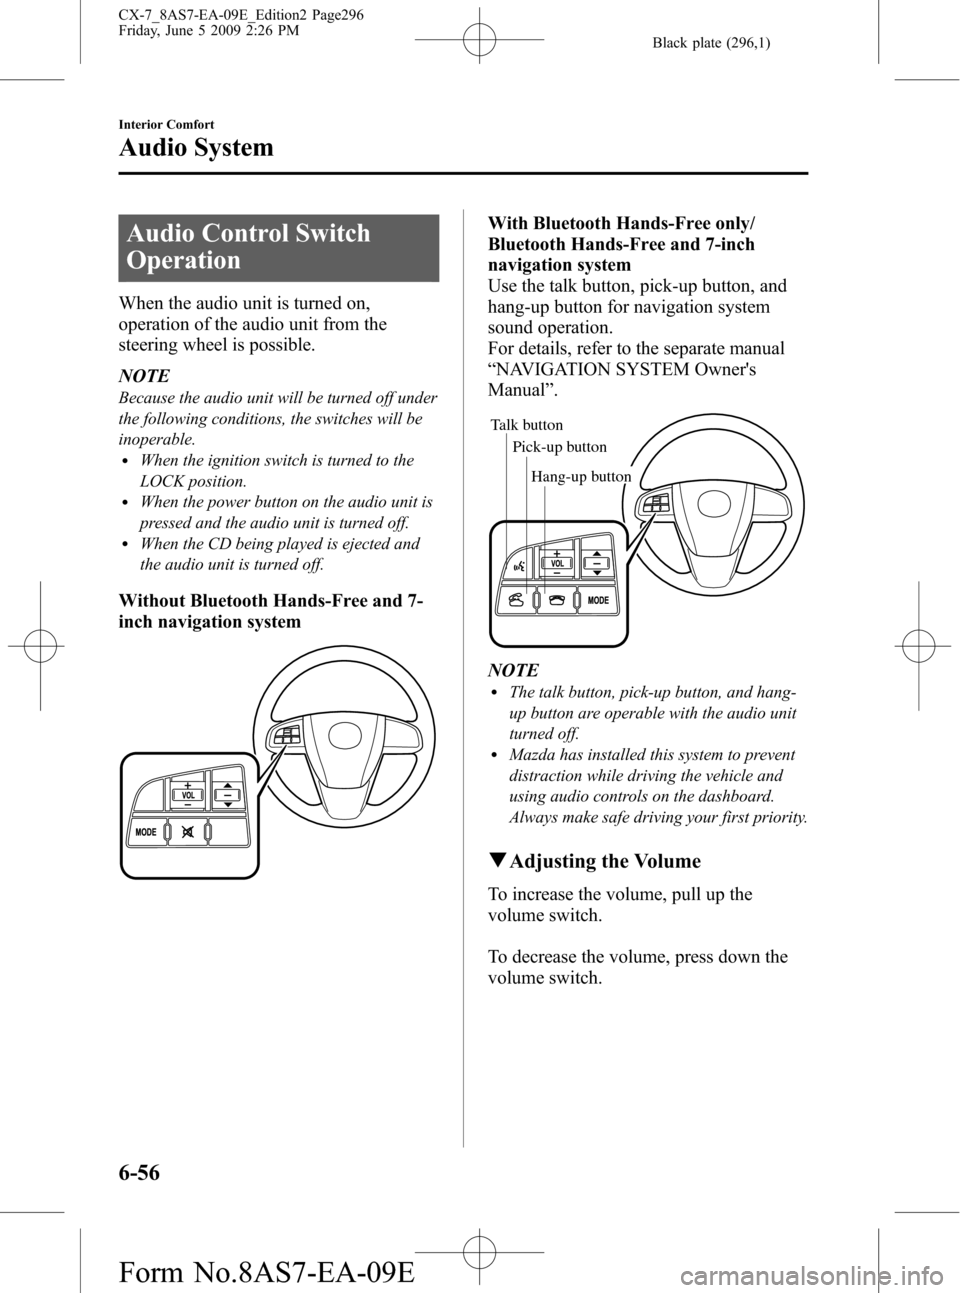 MAZDA MODEL CX-7 2010  Owners Manual (in English) Black plate (296,1)
Audio Control Switch
Operation
When the audio unit is turned on,
operation of the audio unit from the
steering wheel is possible.
NOTE
Because the audio unit will be turned off und